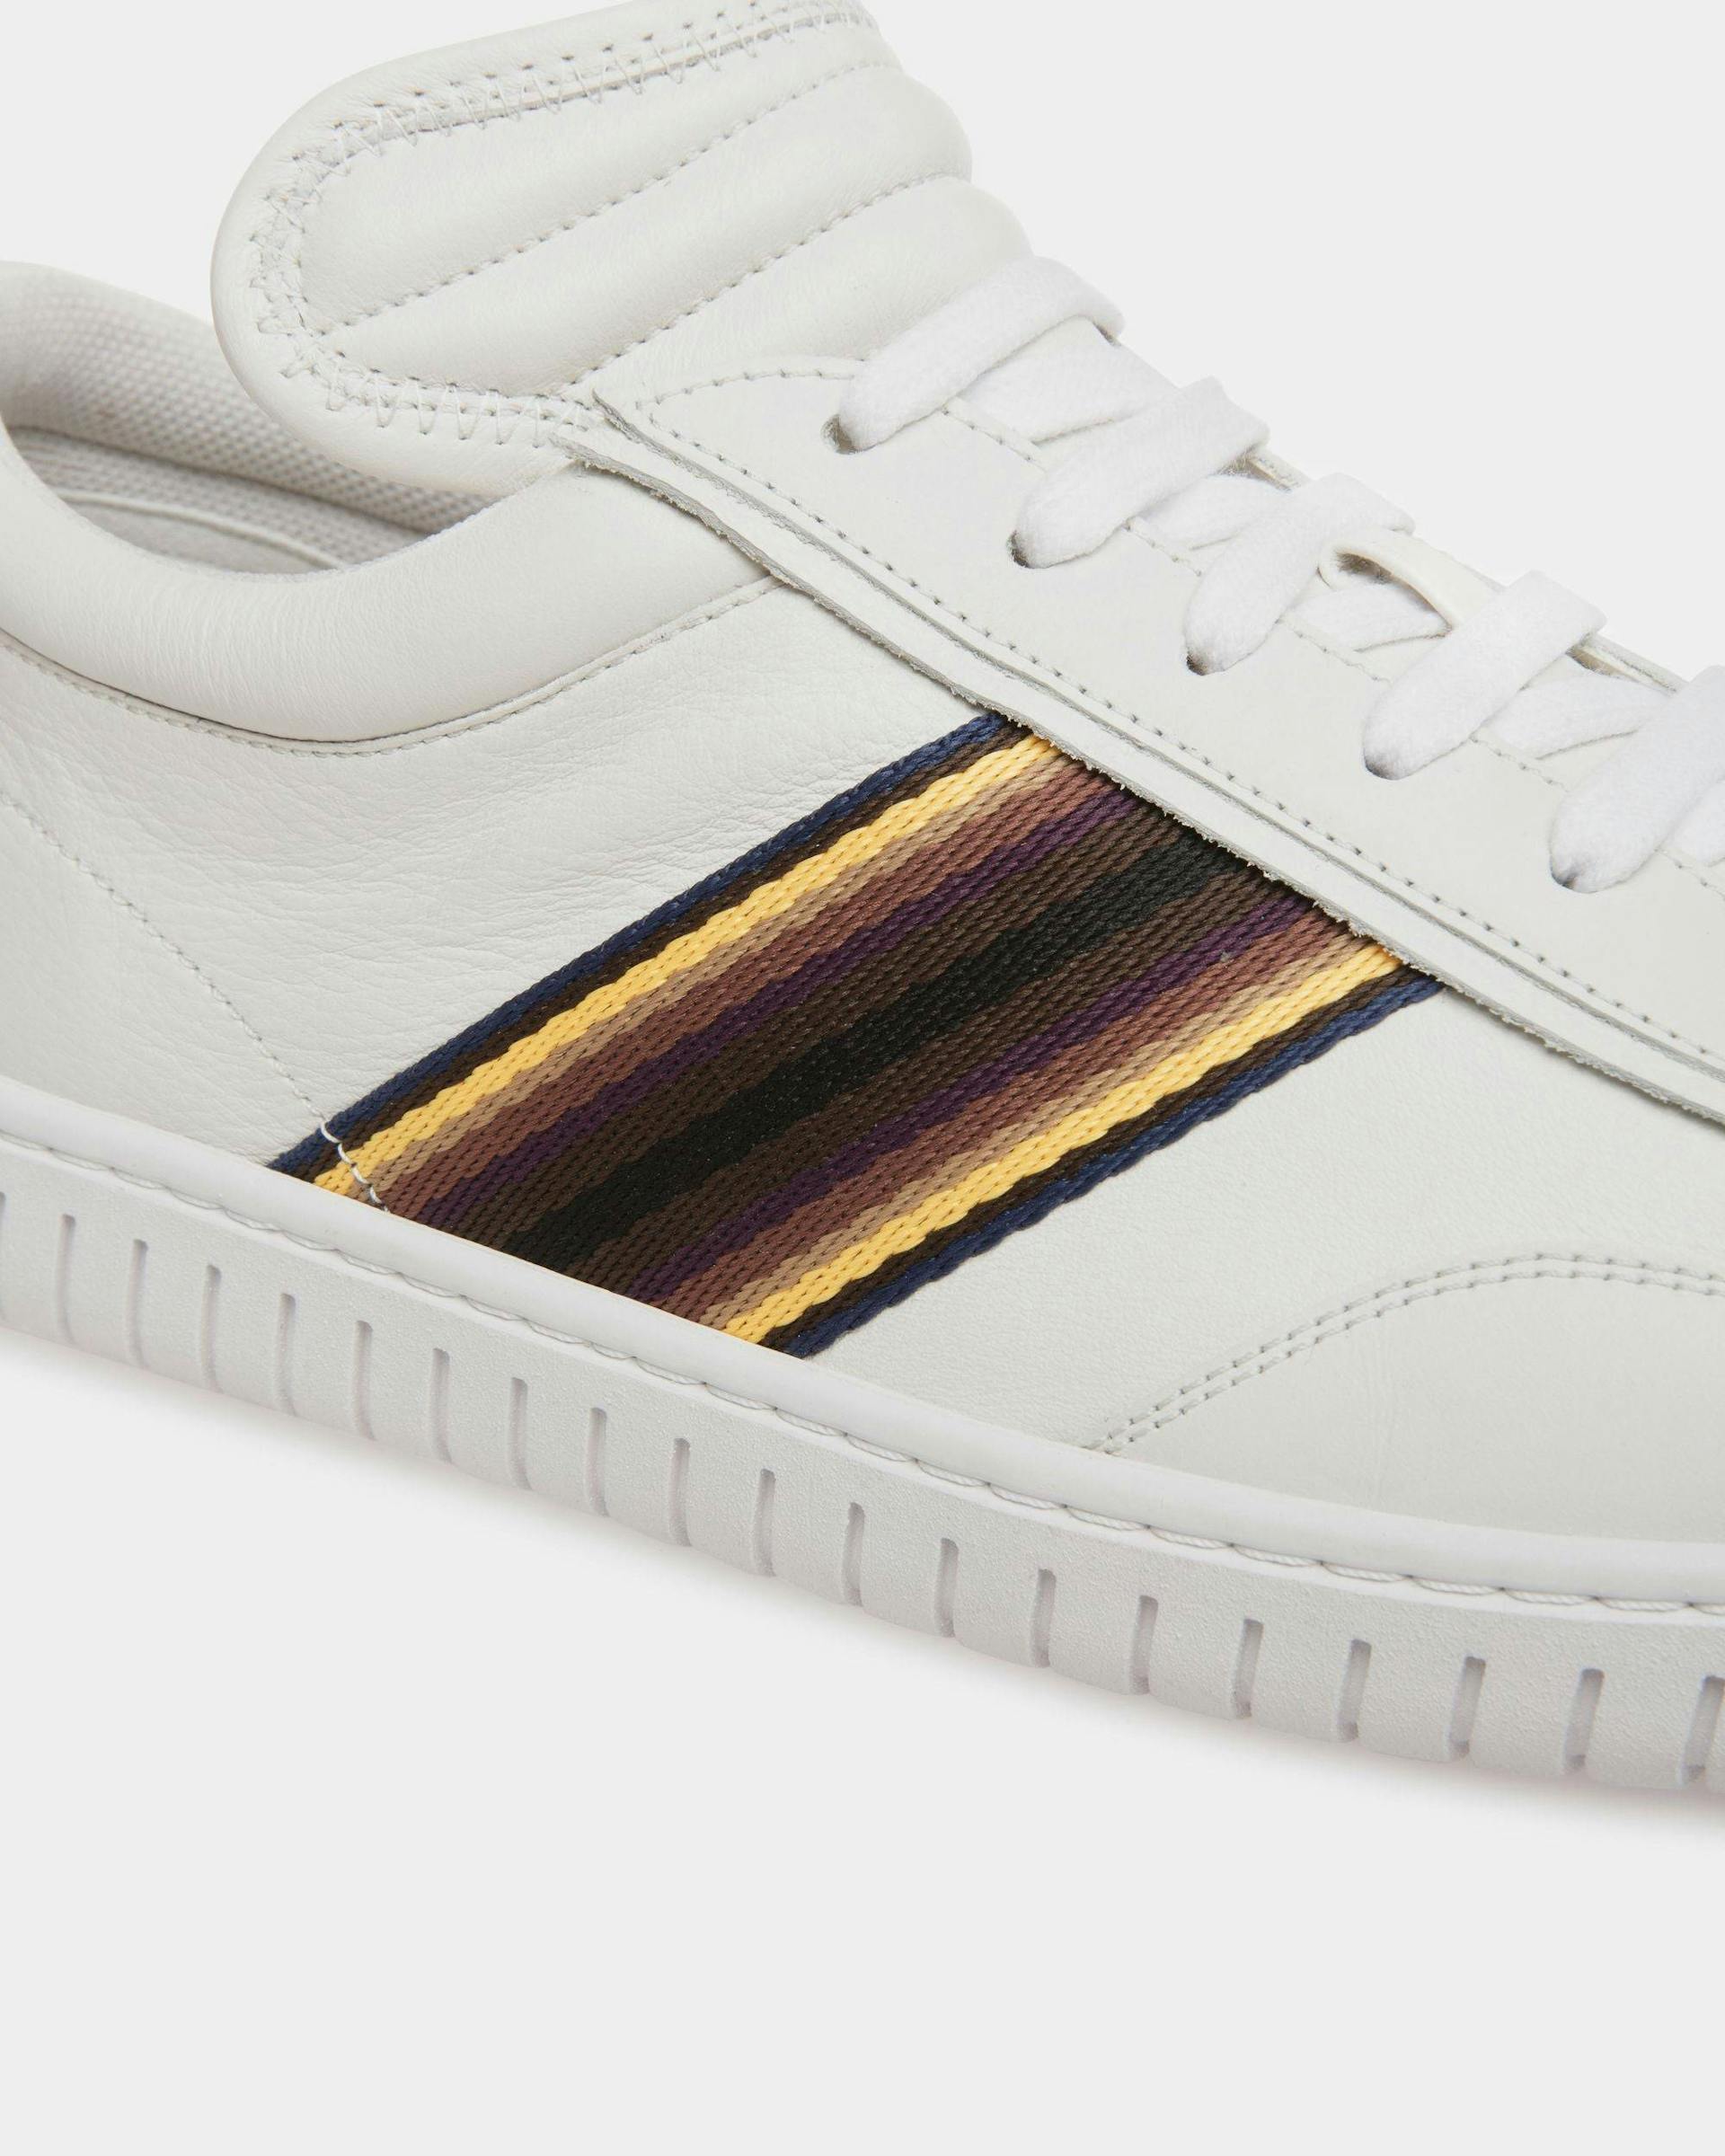 Men's Player Sneakers In White Leather | Bally | Still Life Detail